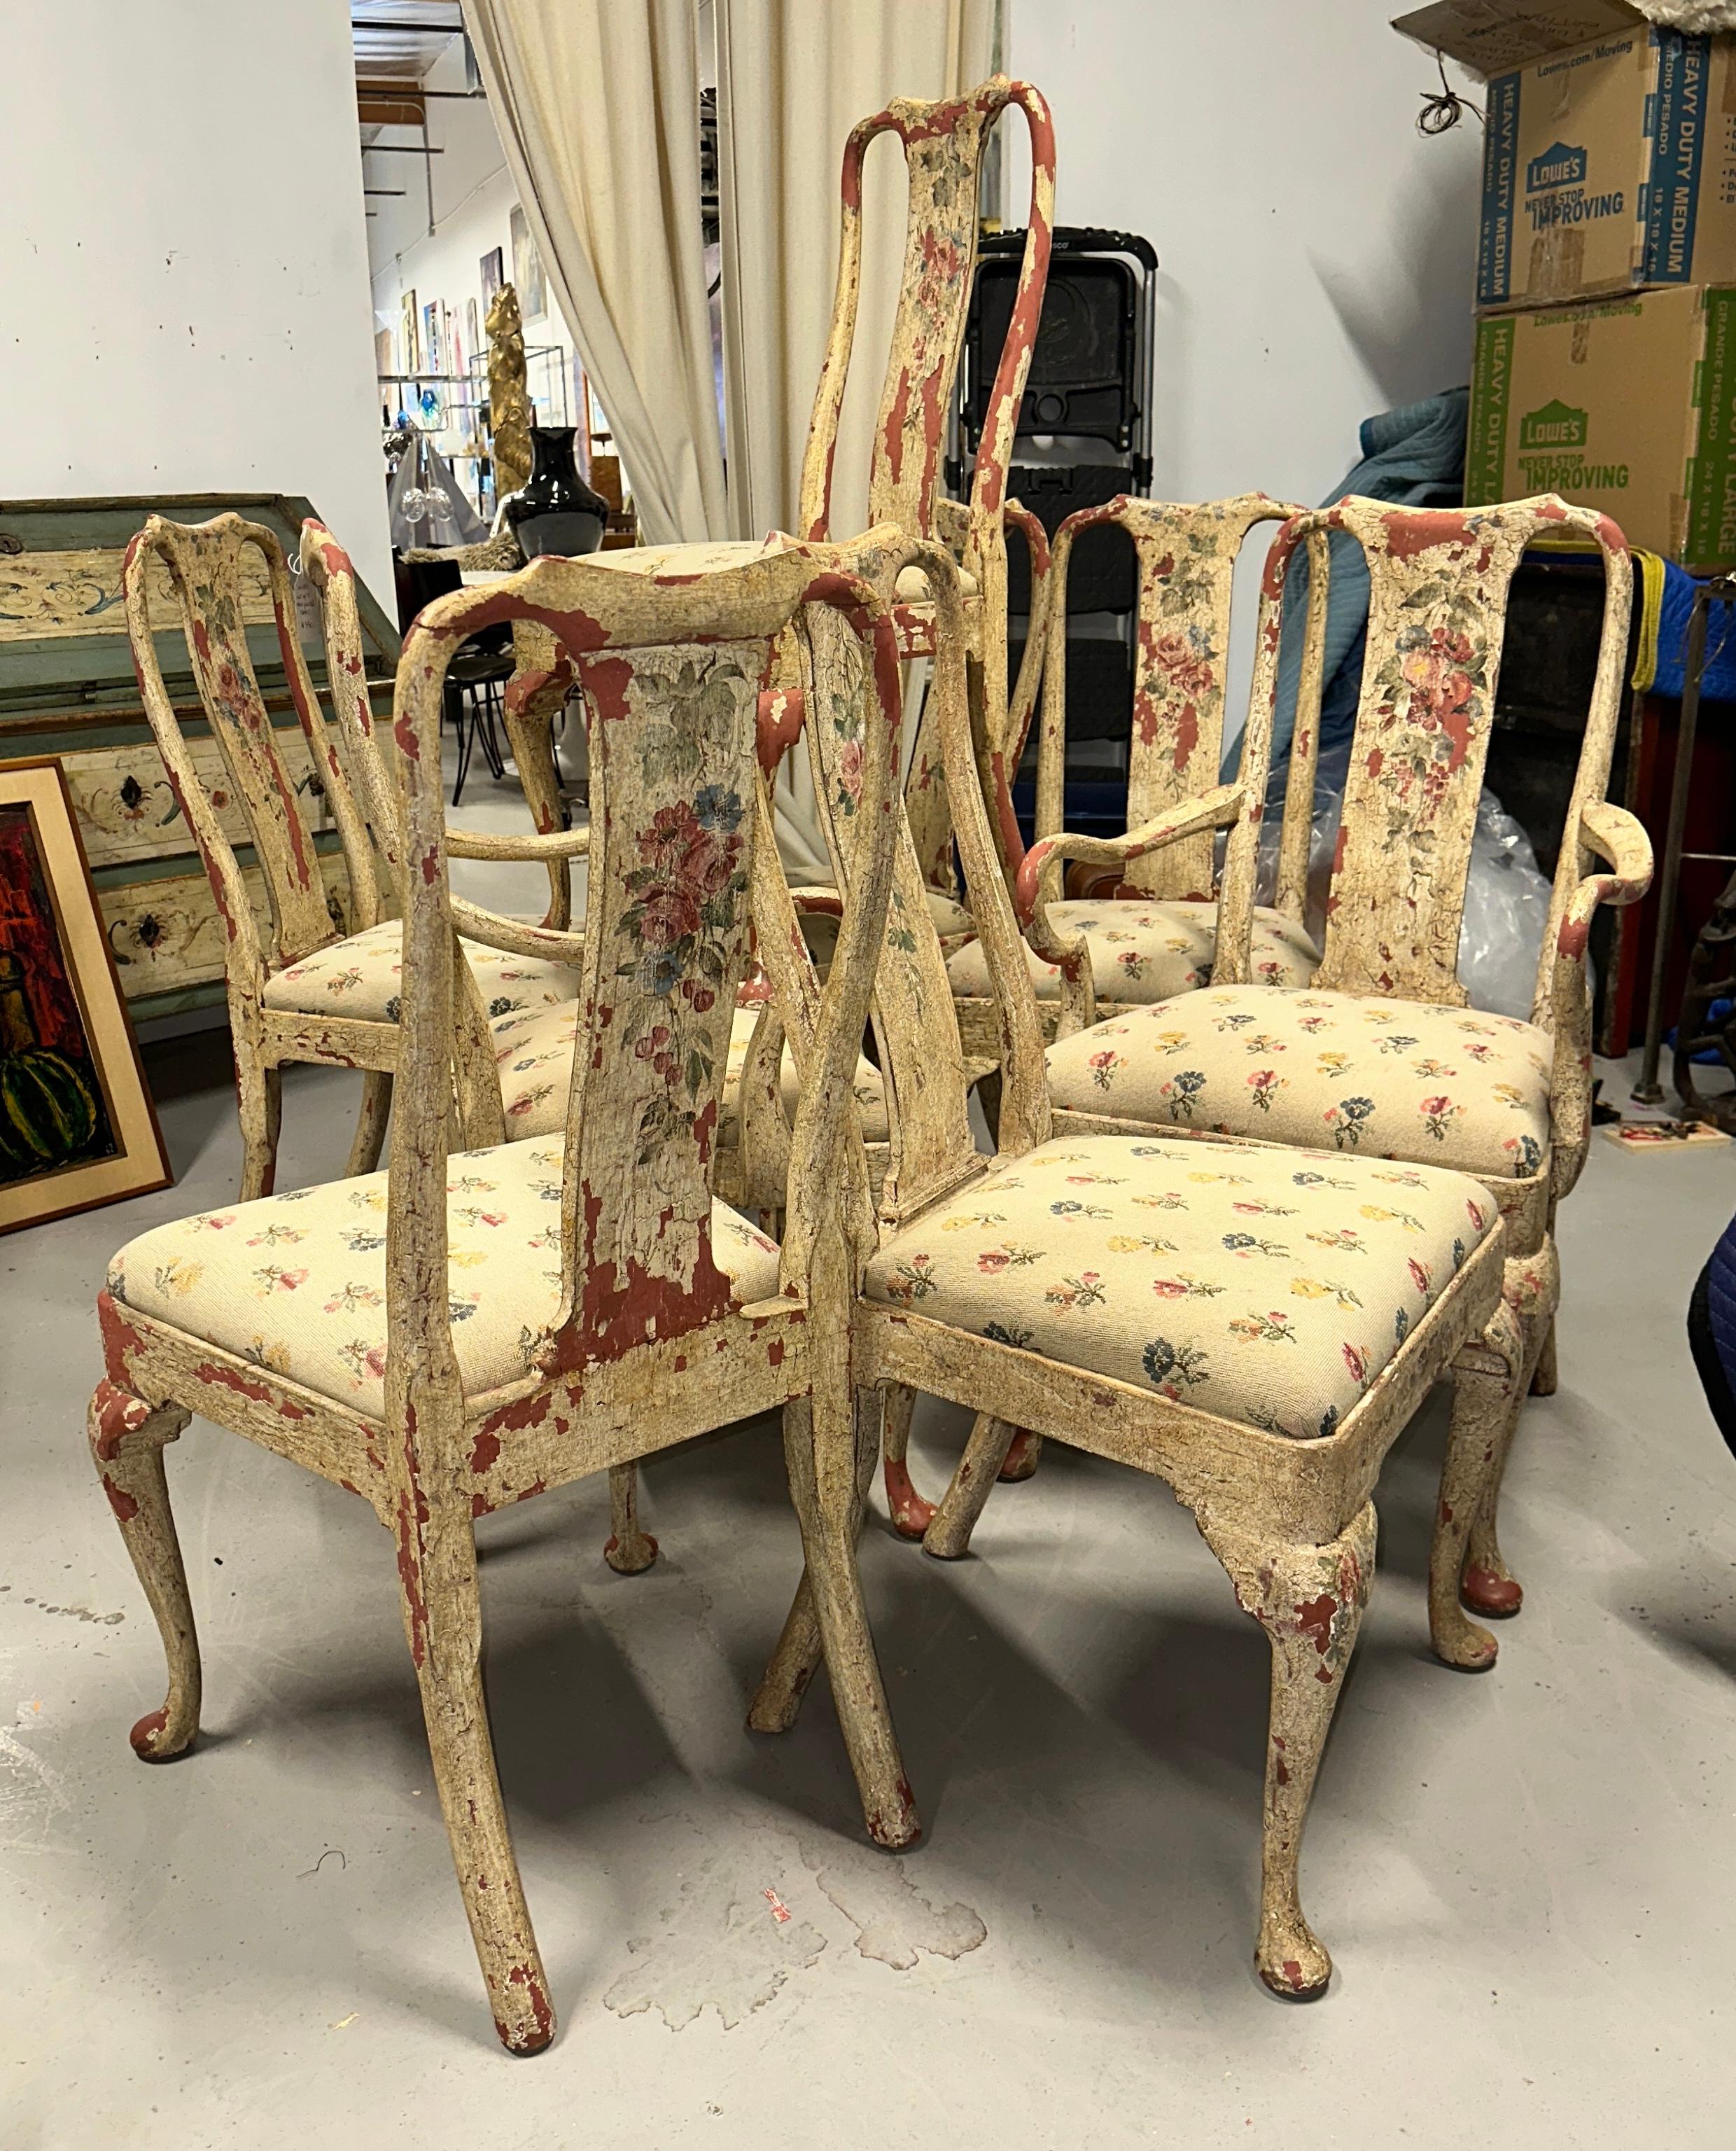 A wonderful set of 8 hand painted dining chairs with lovely needlepoint cushion seats in a floral pattern. There are 2 arm chairs and 6 side chairs. The paint is chipping all over to reveal a great shade of red underneath, perhaps the original